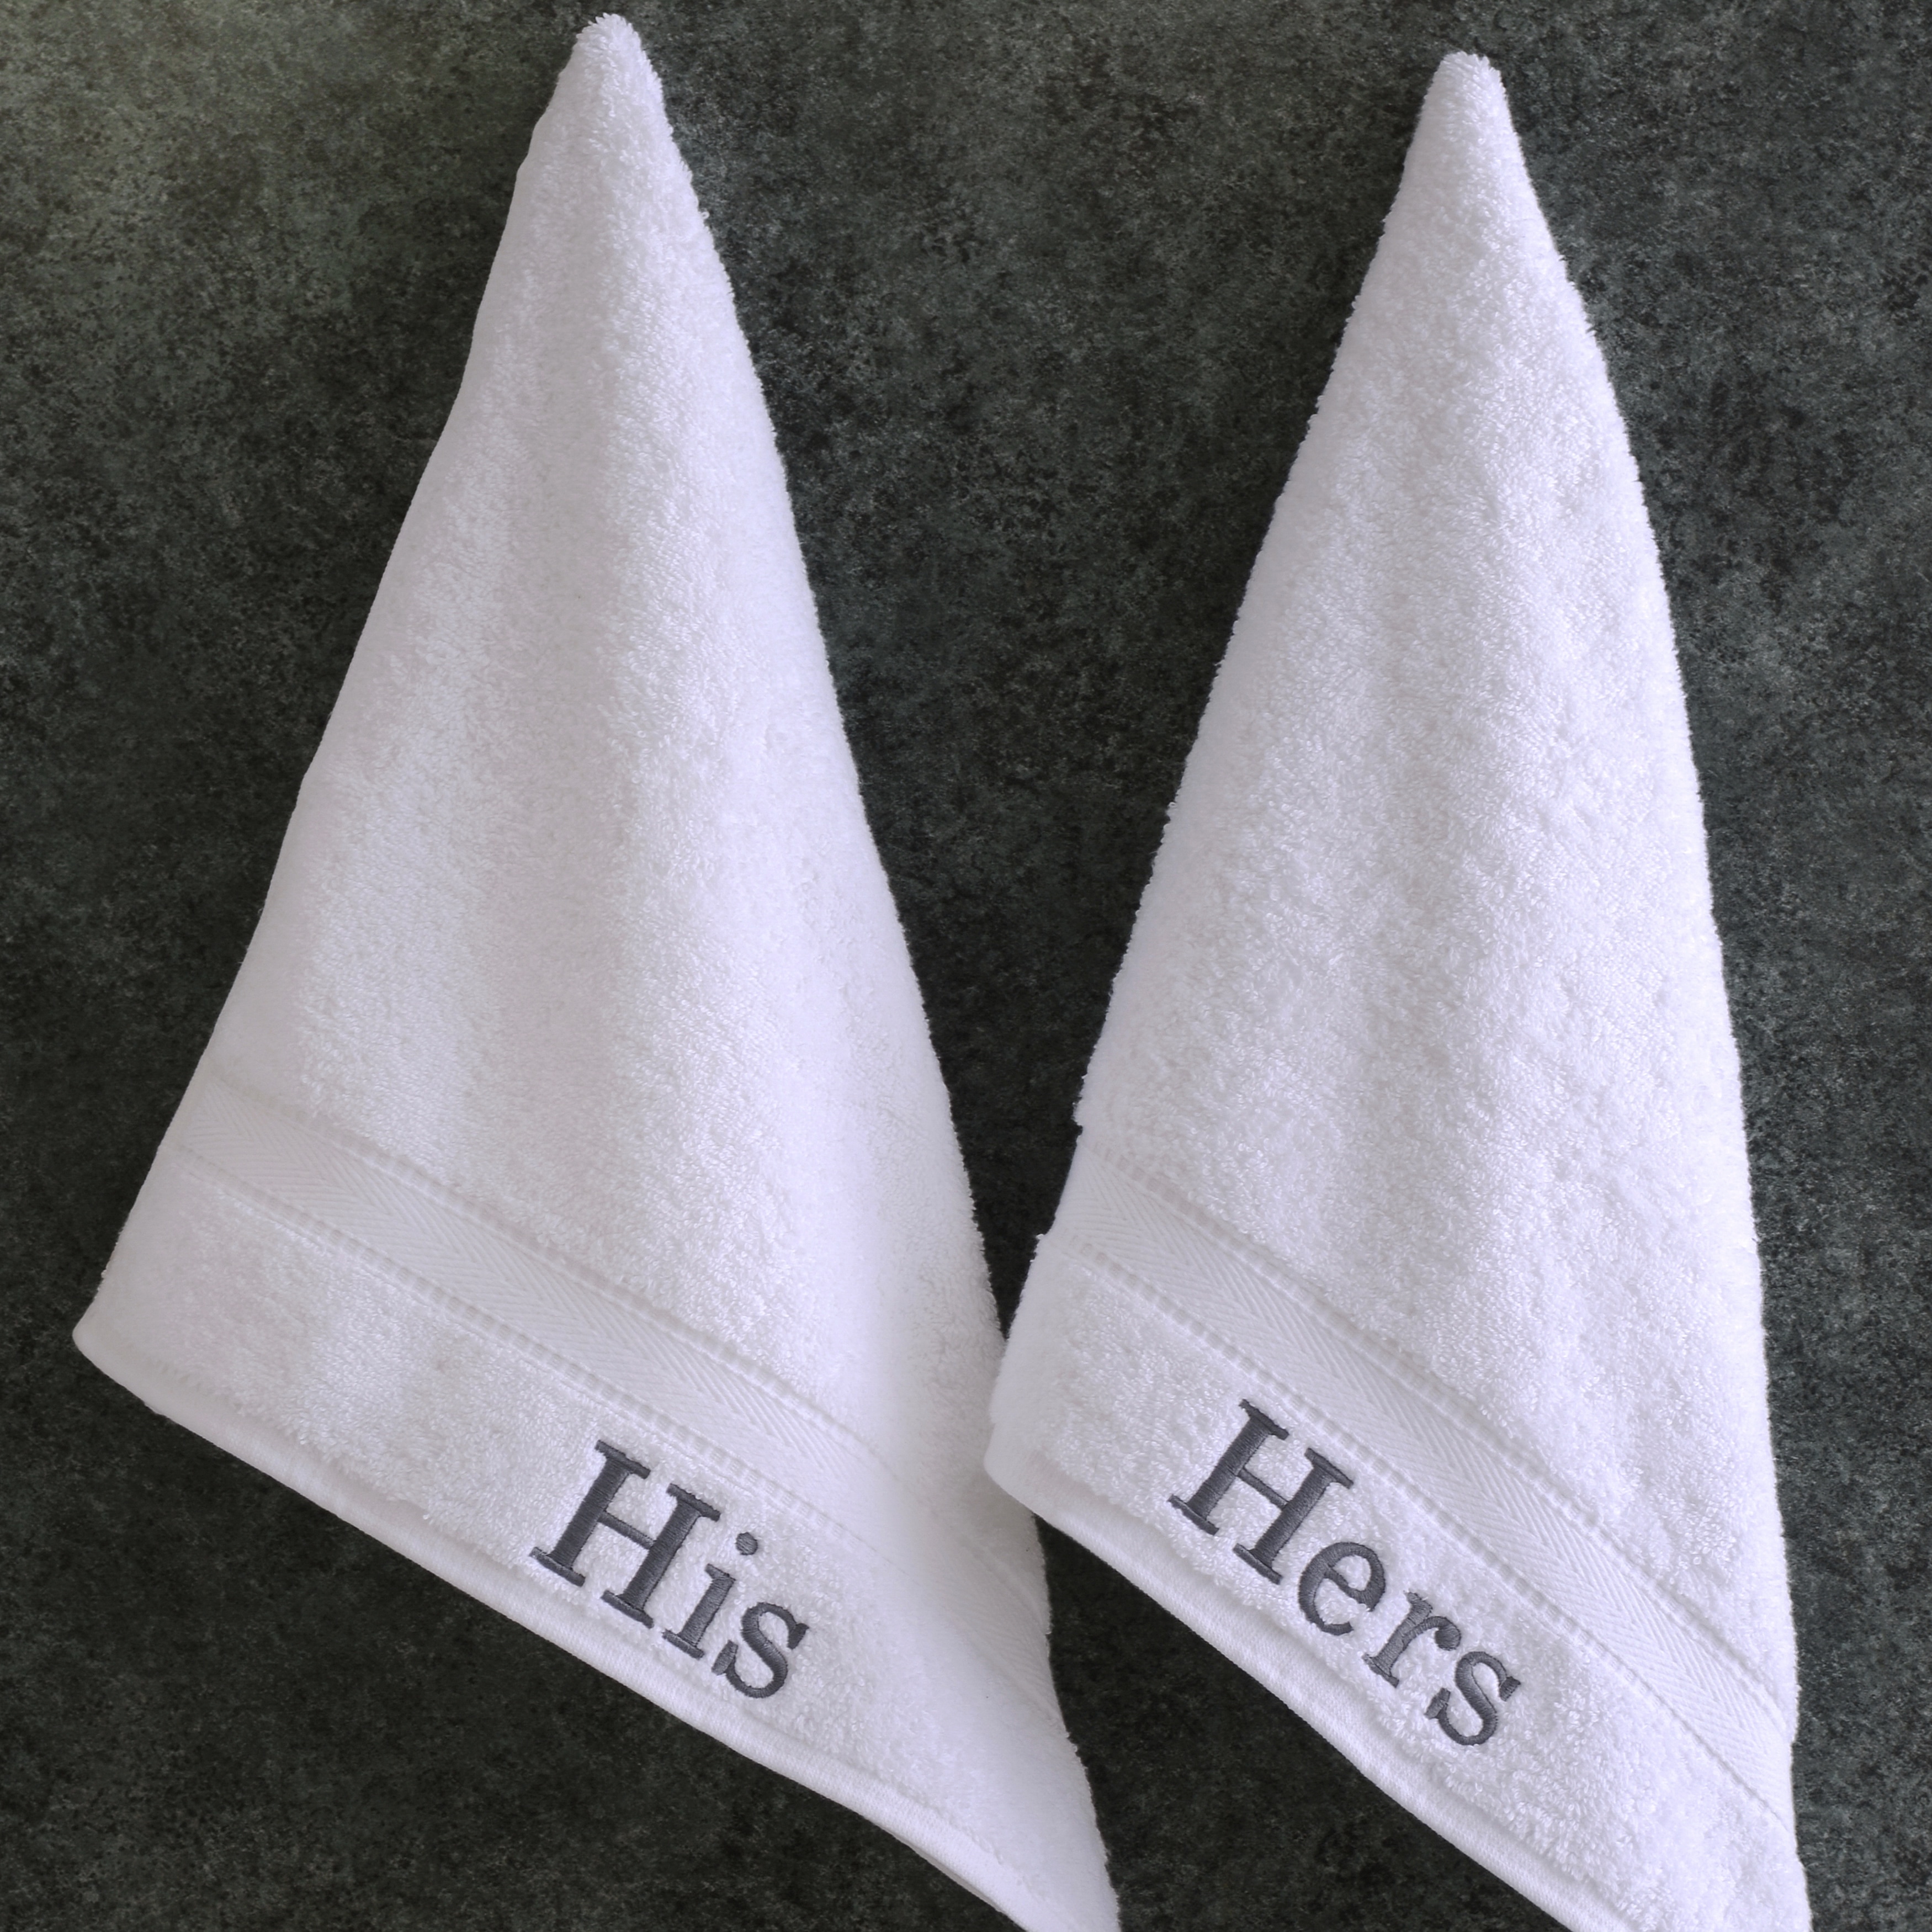 His/hers Embroidered Towel Hand Bath Sheet 